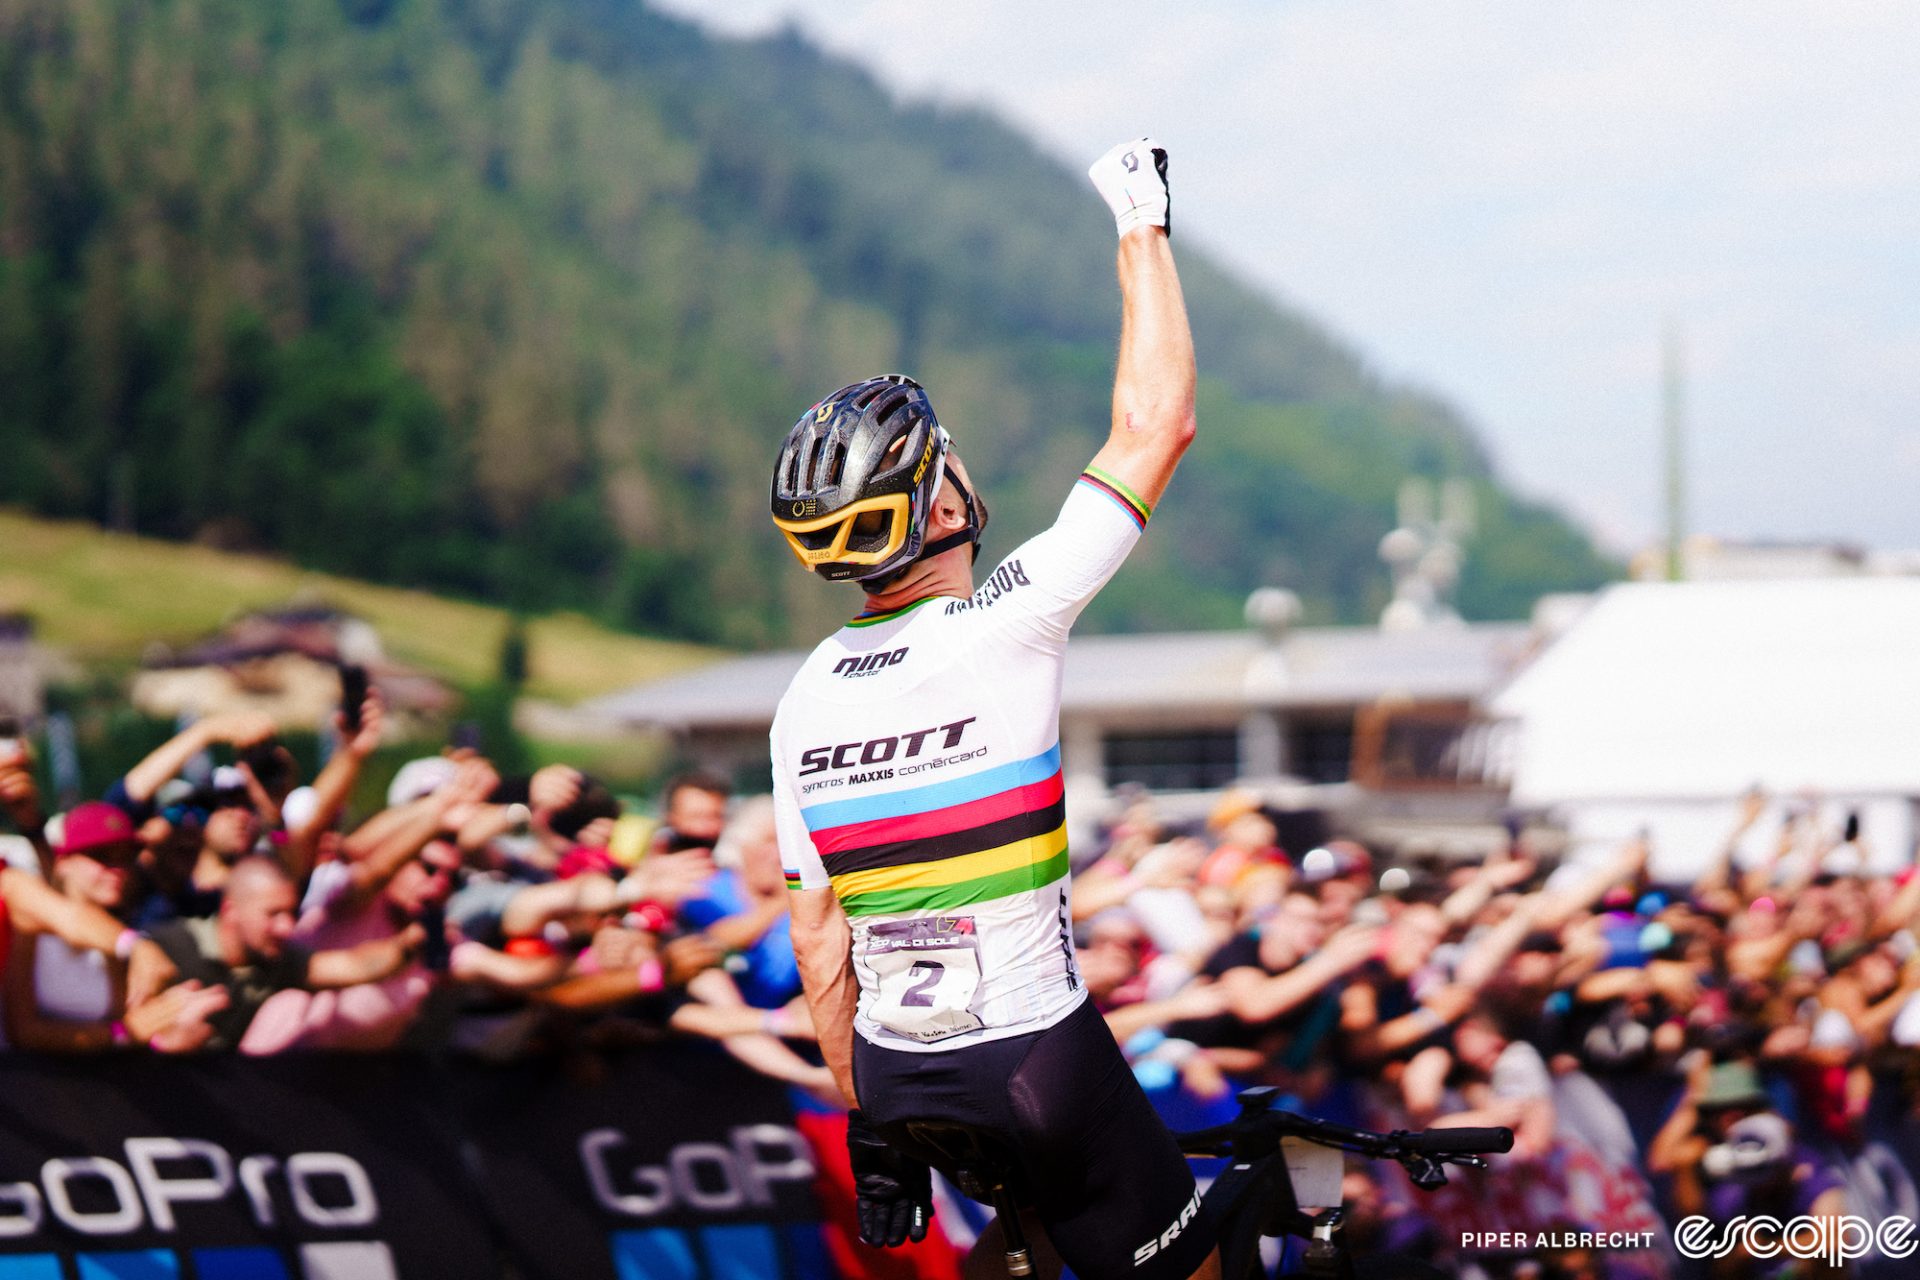 Nino Schurter holds a raised fist to the sky and looks up as he crosses the finish line for yet another World Cup win. He's shown from behind, in the rainbow jersey of World Champion, with big cheering crowds blurred out behind.